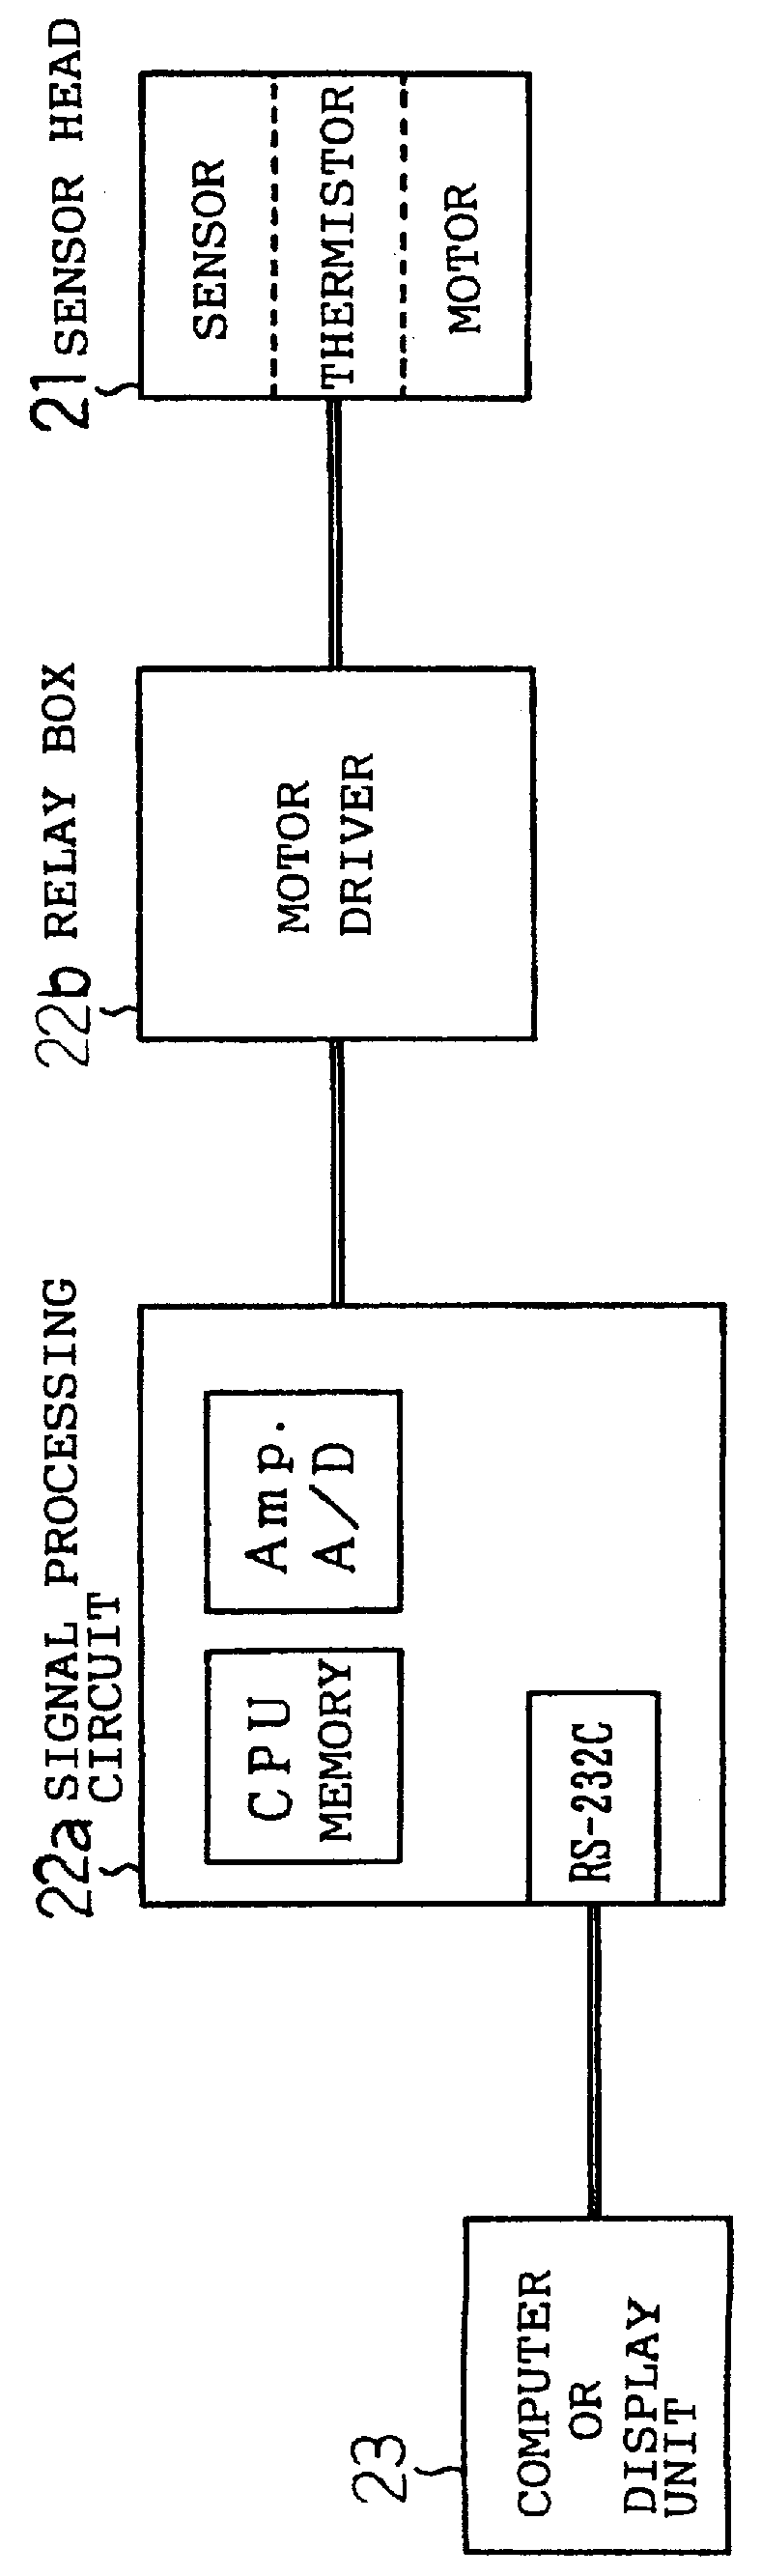 Movement pattern recognizing apparatus for detecting movements of human bodies and number of passed persons